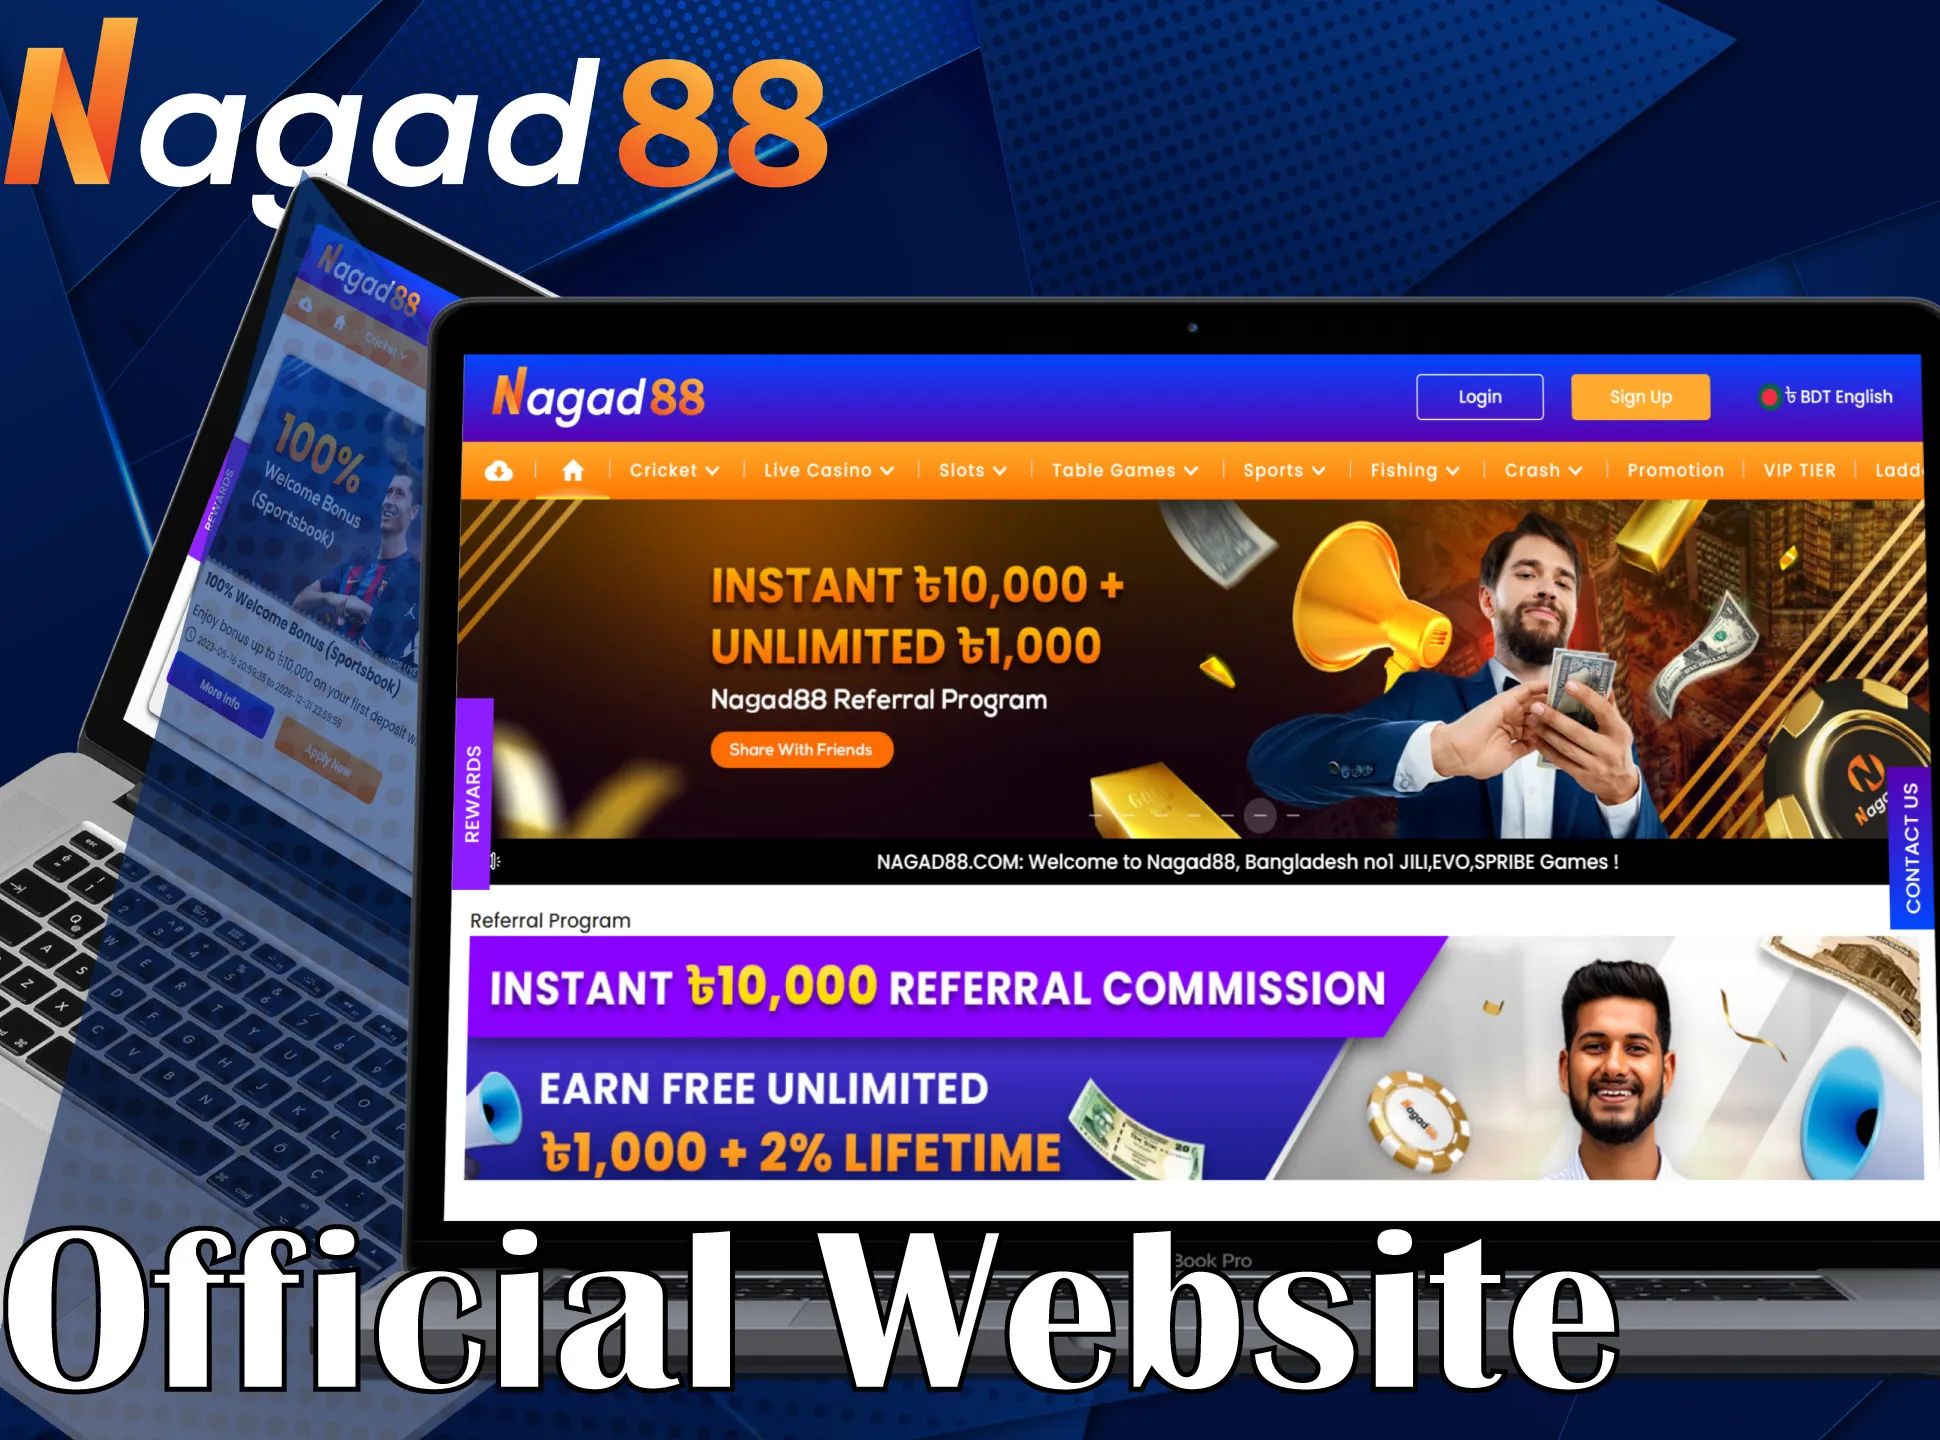 Visit the official Nagad88 website to play and bet.